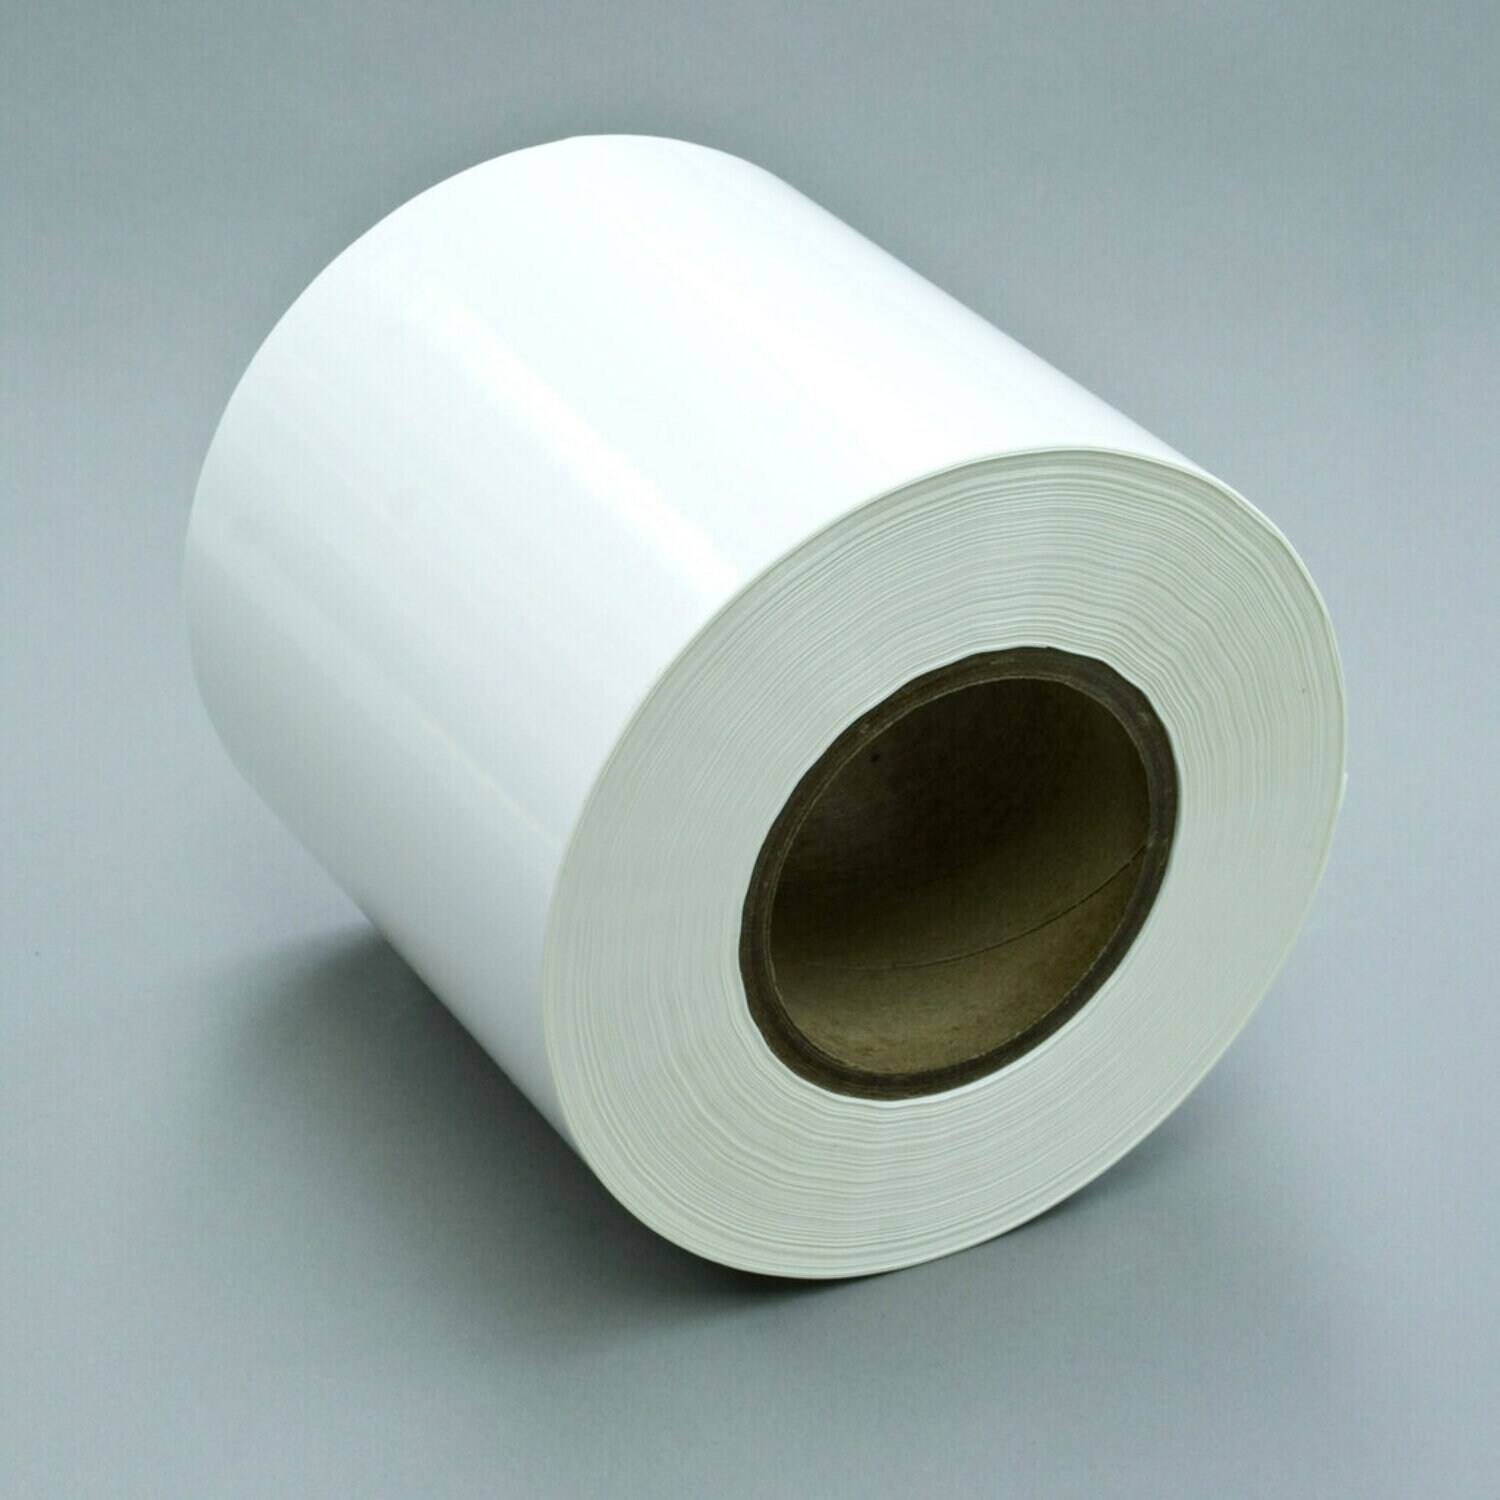 7100013744 - 3M Sheet and Screen Label Material 7908FL, White Polyester Gloss, Roll,
Config